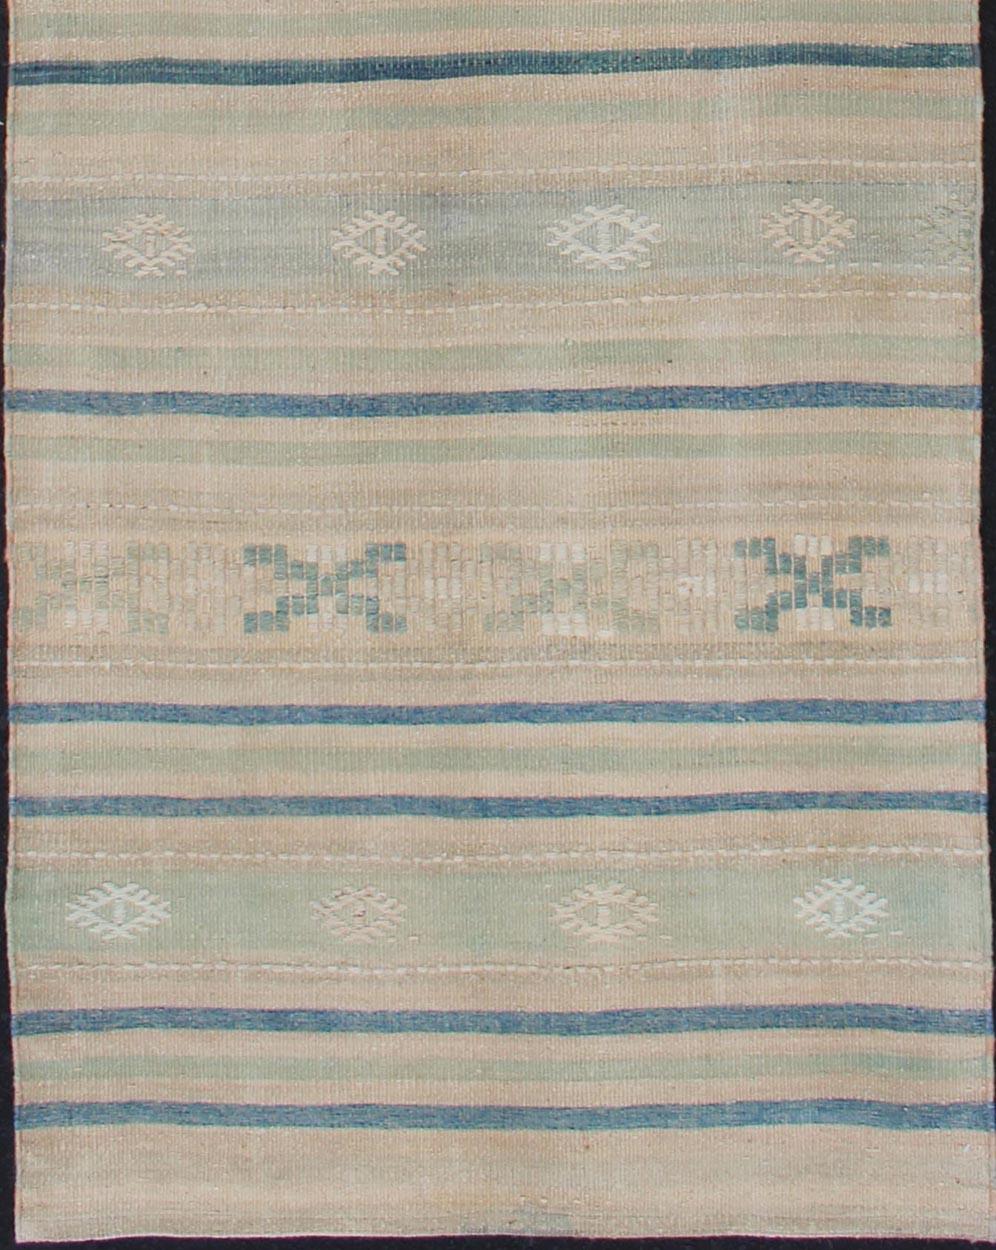 Measures: 2'8 x 10'1.

This flat-woven Kilim runner from Turkey features an exciting composition consisting of stripes rendered in natural tones of brown, blue, and gray, as well as some green shades, making this an ideal piece for modern,